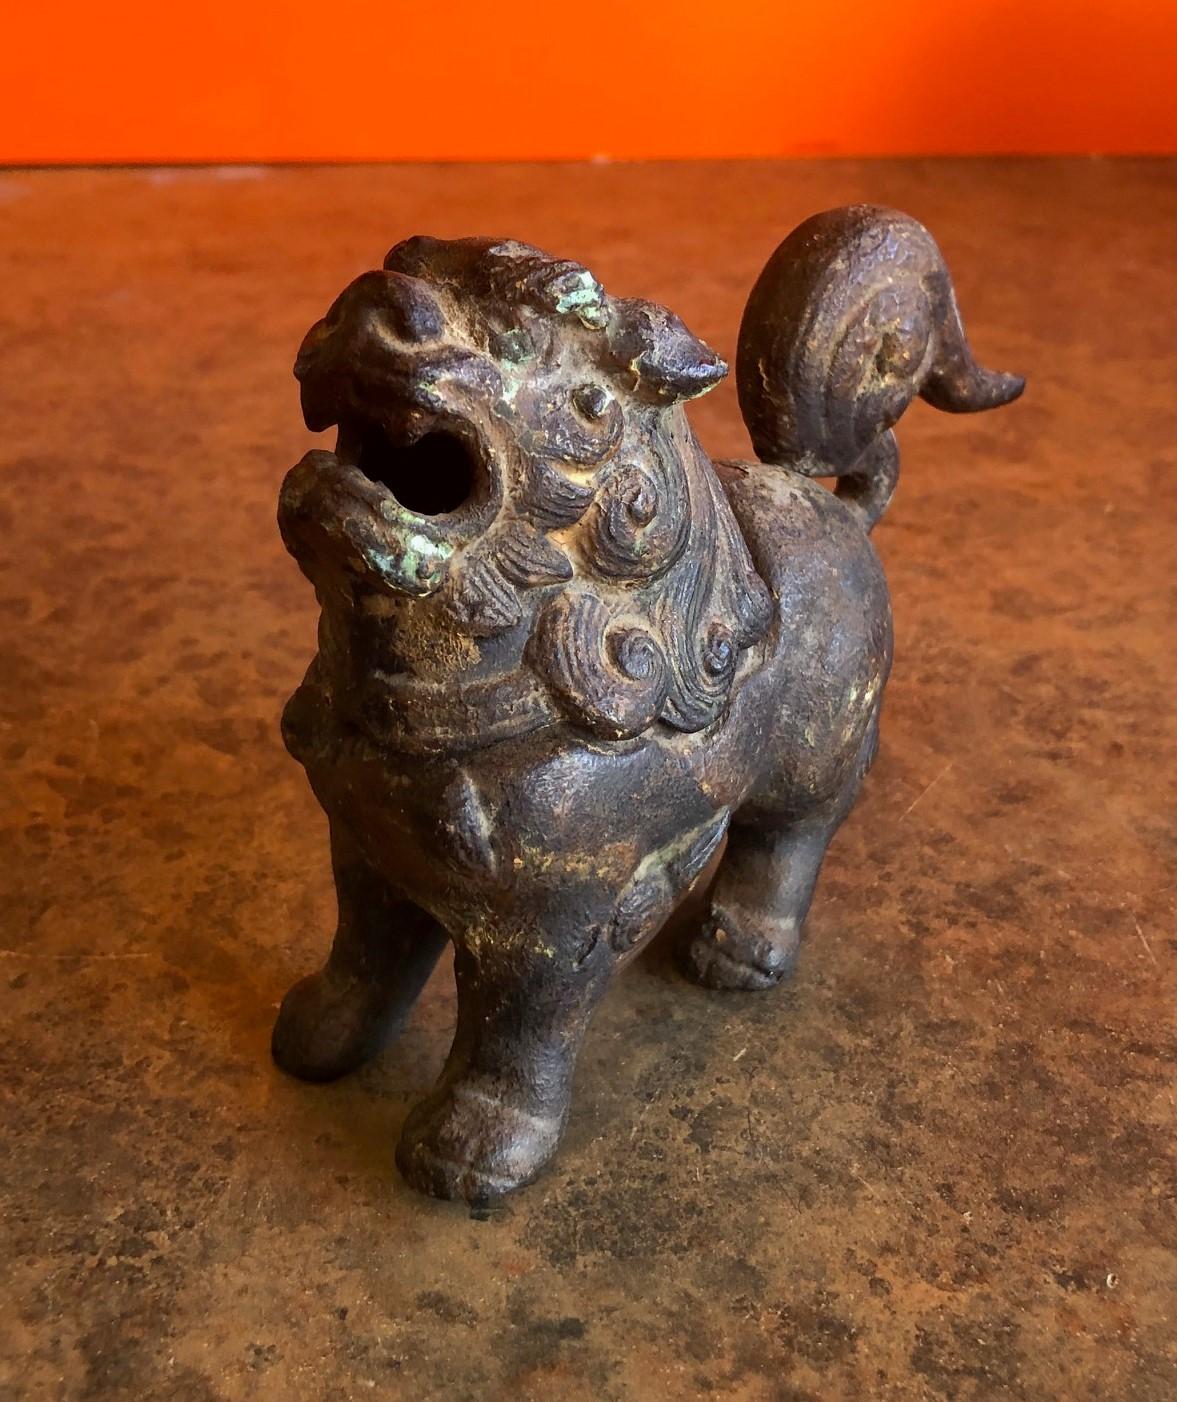 Antique patinated iron foo dog incense burner, circa early 1900s. The head is removable to load with incense.